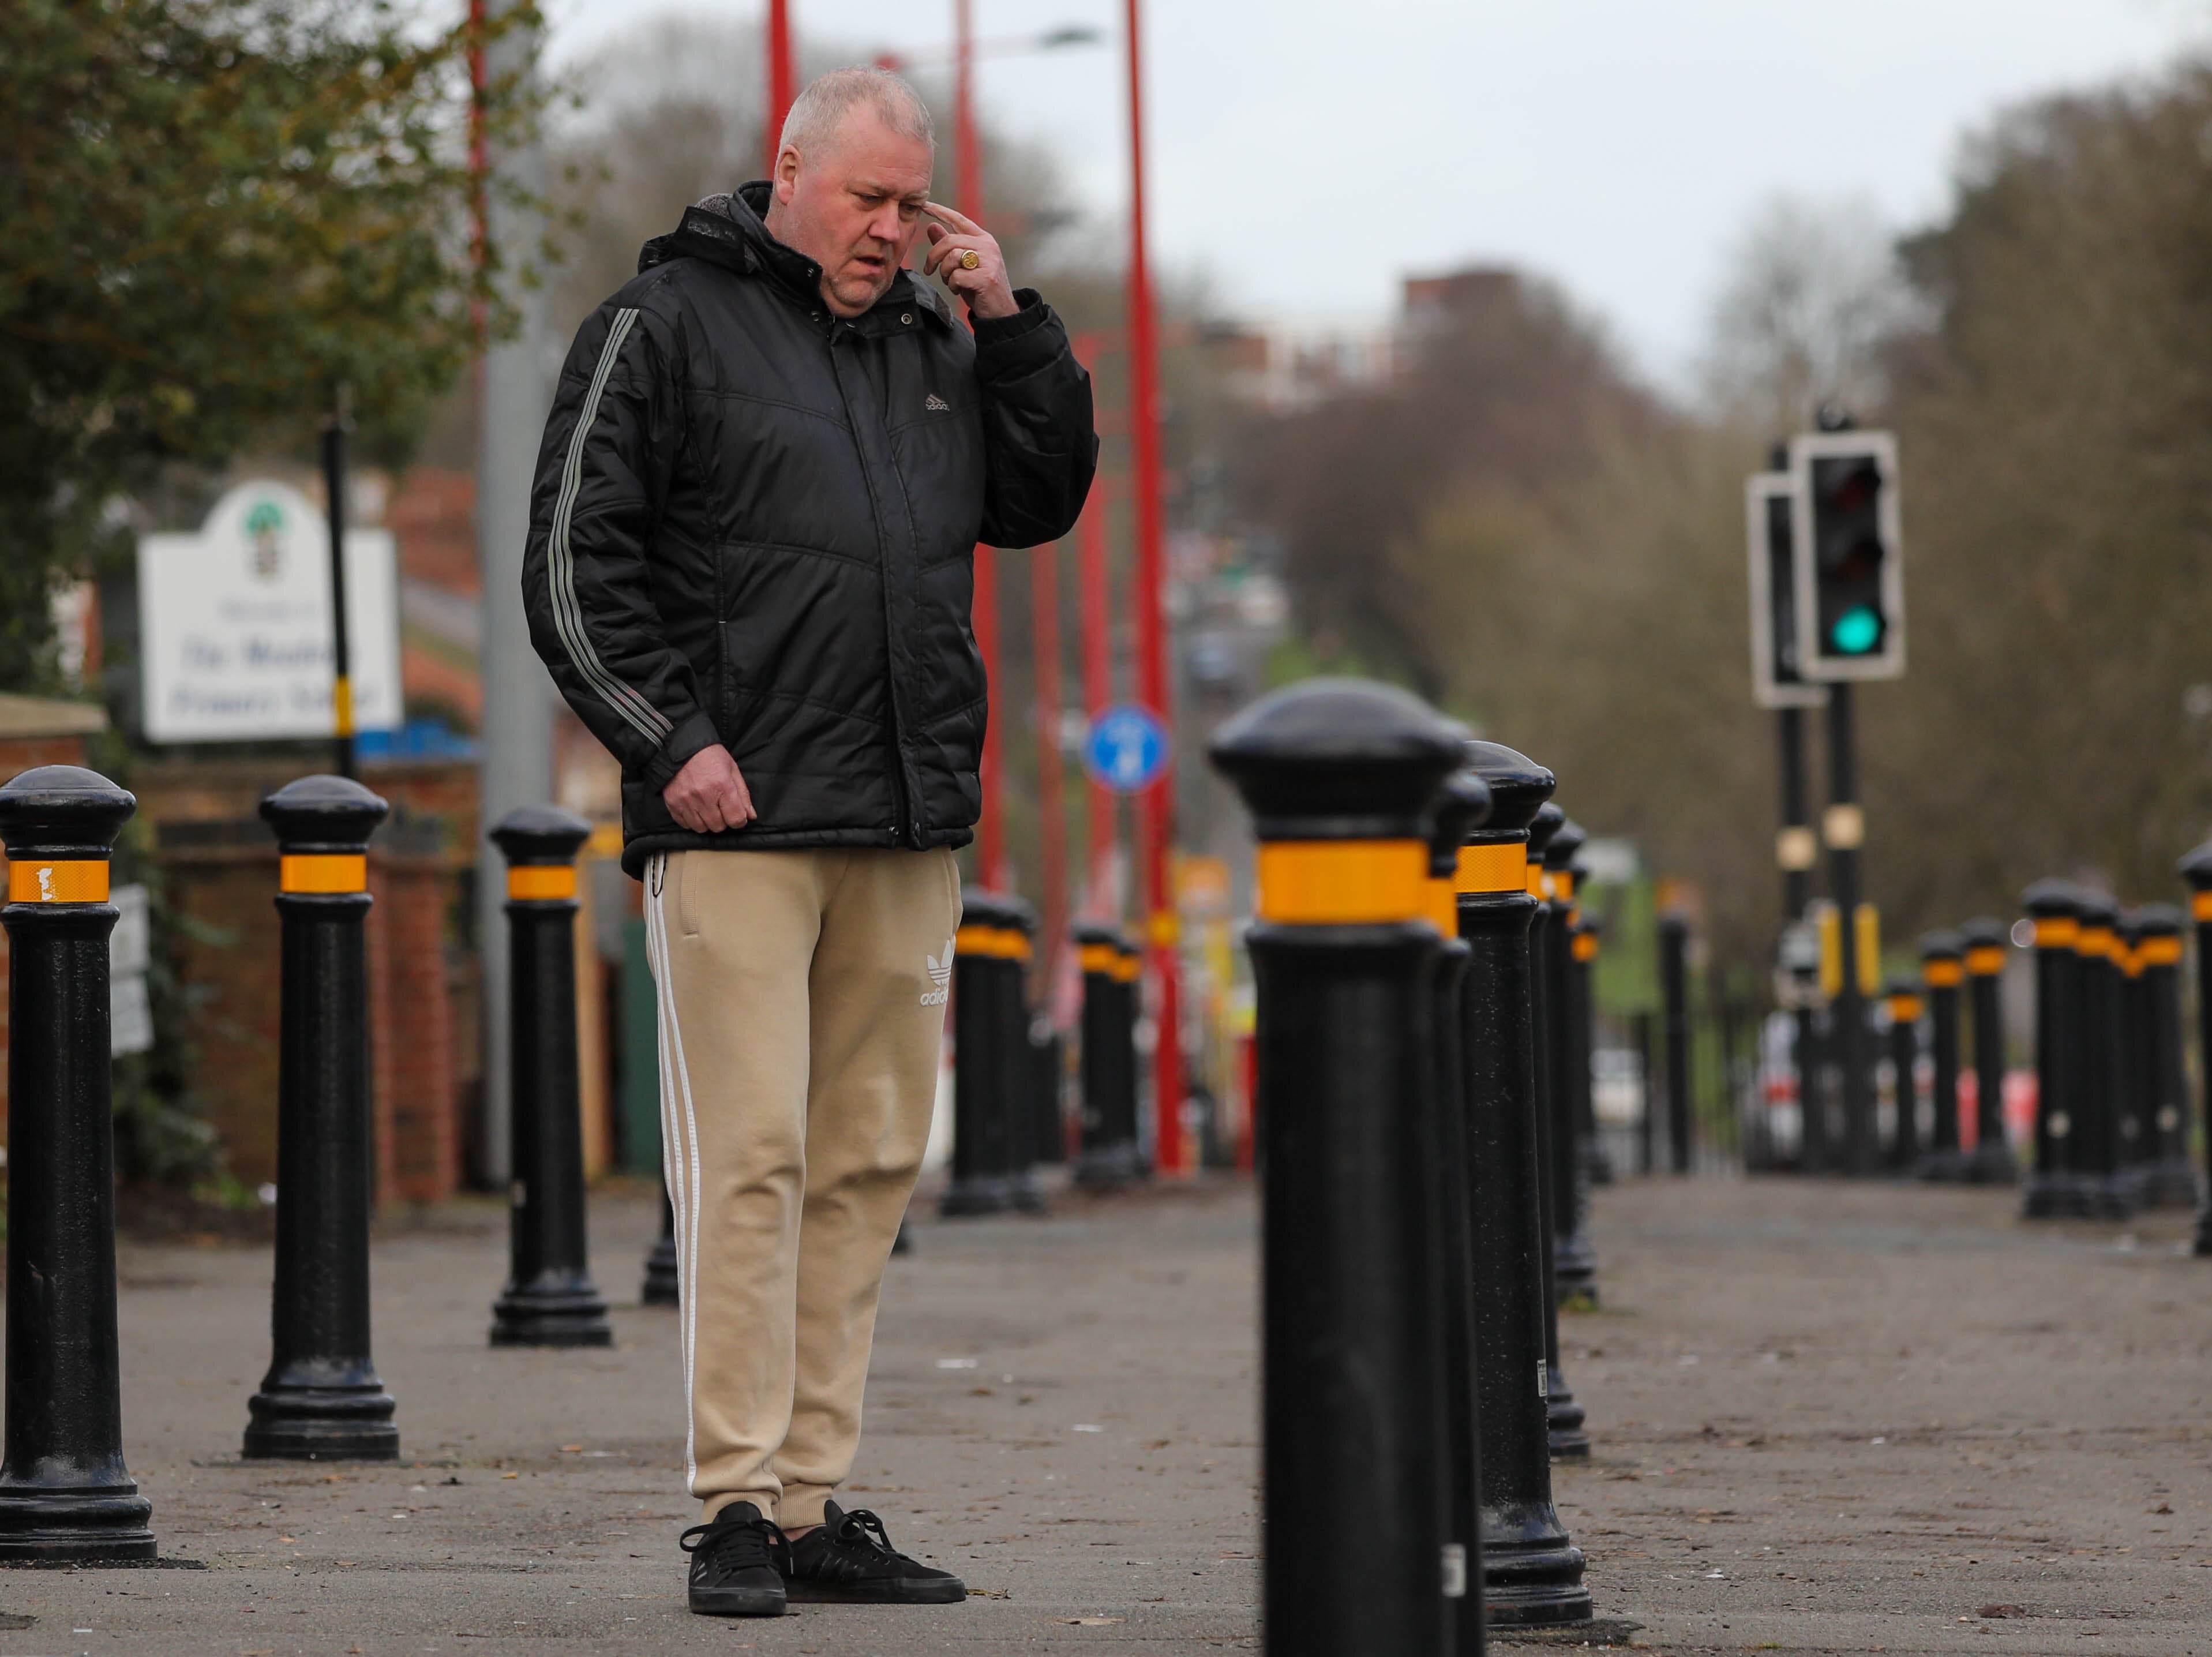 One passer by appeared confused by the bollards